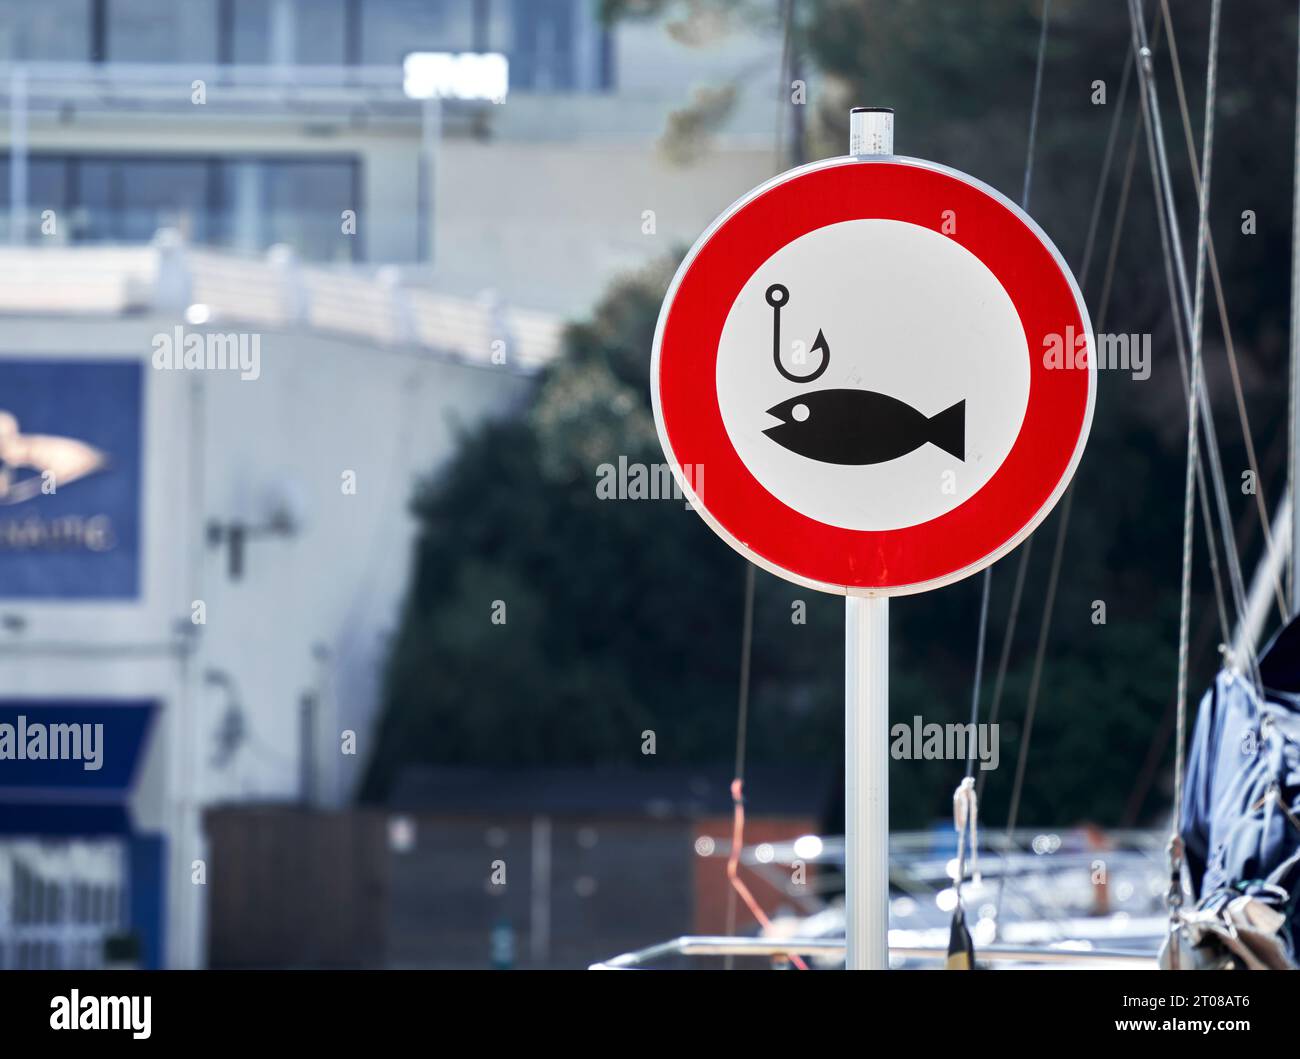 Sign with a fishing hook and a fish in a red circle indicating that fishing is prohibited in the harbor Stock Photo